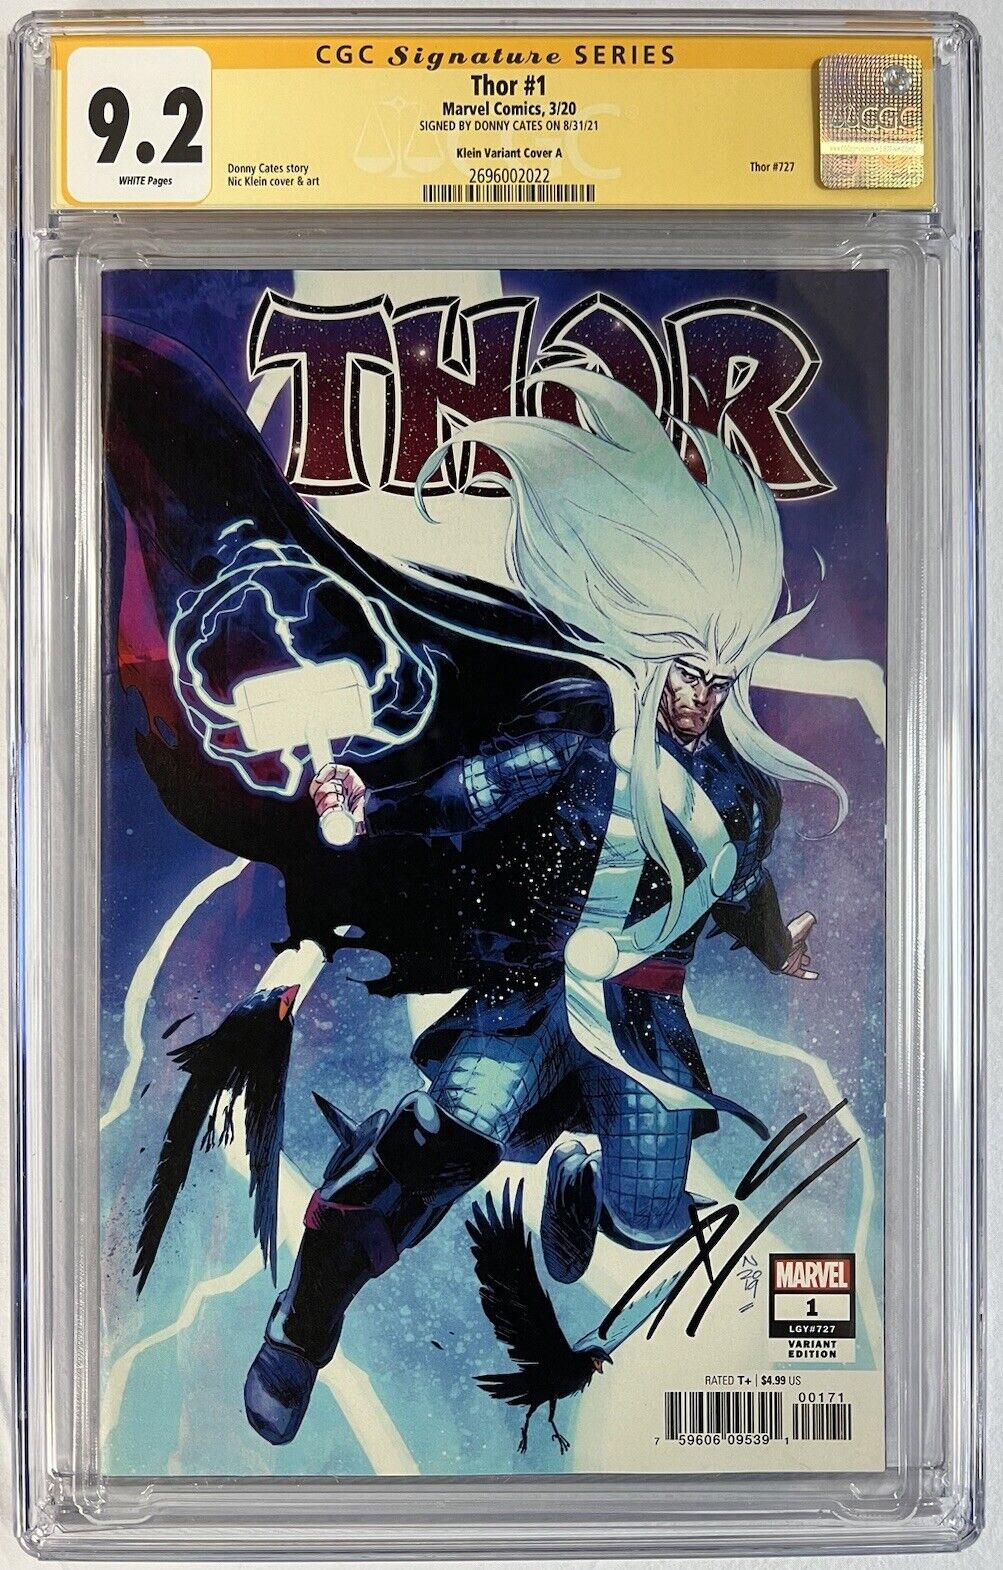 Thor #1 Marvel Comics Signed By Donny Cates Klein Variant Cover A Graded 9.2 CGC